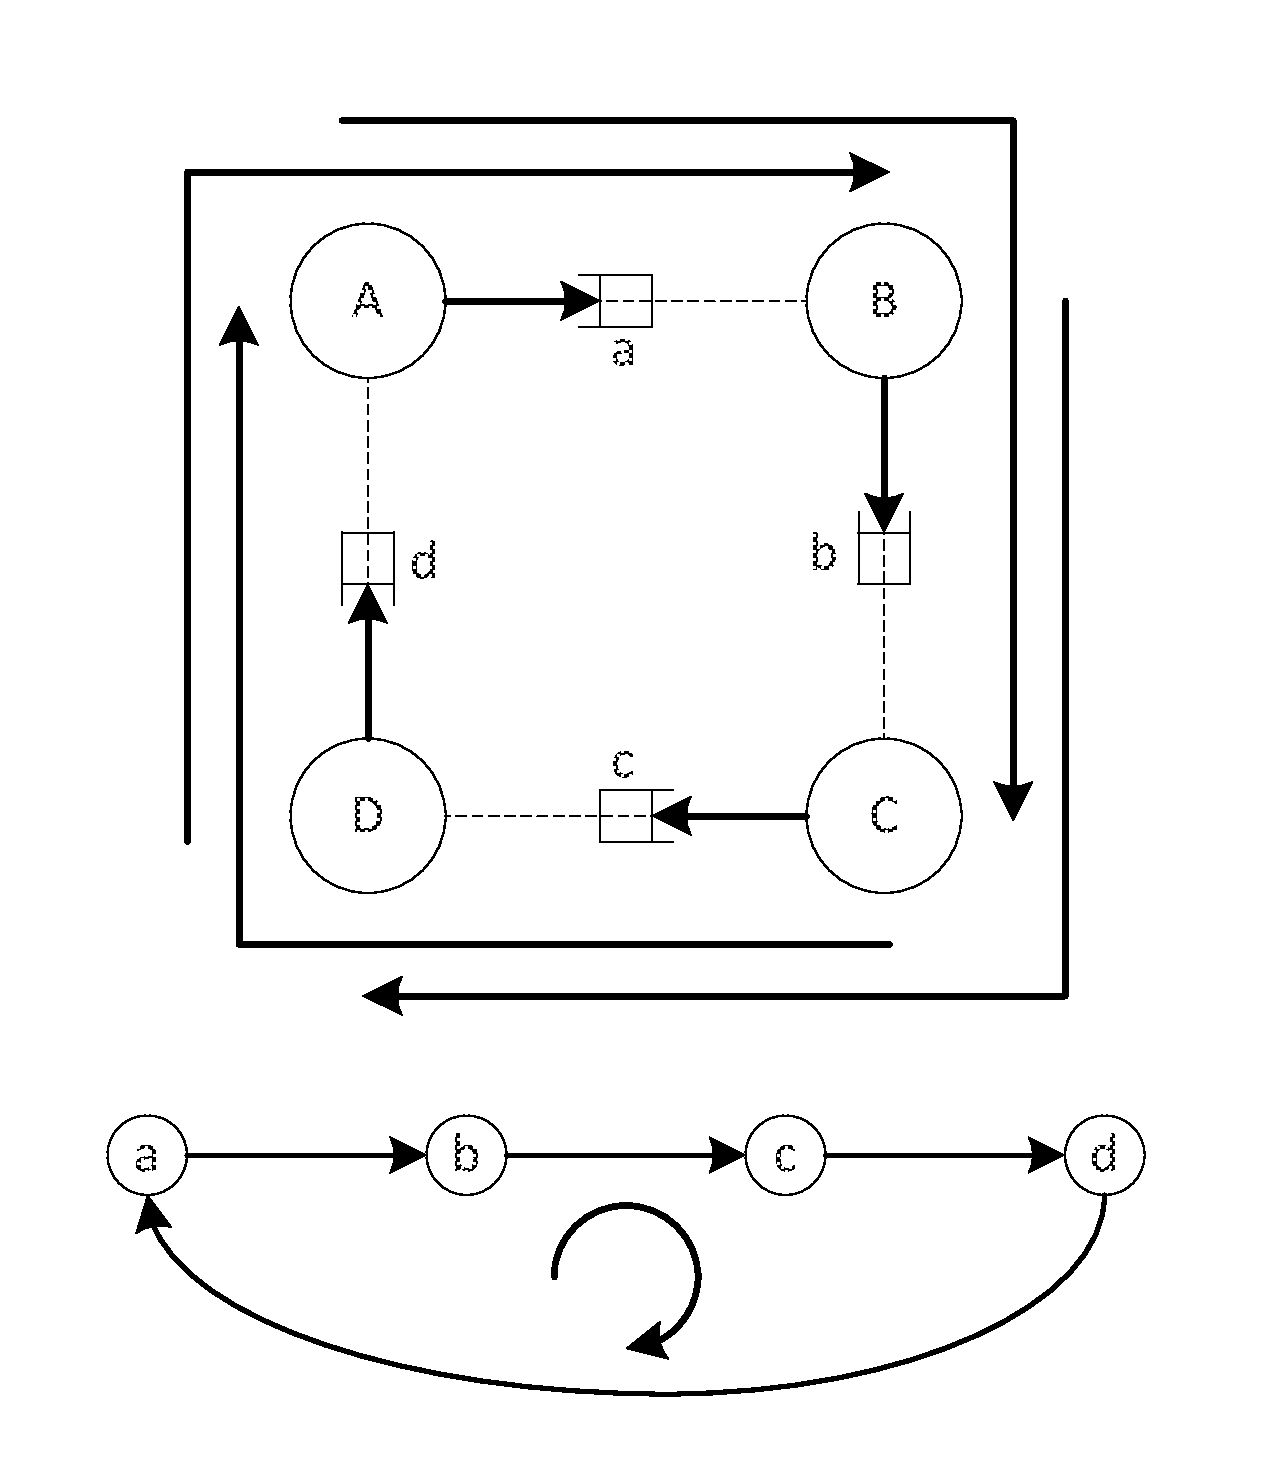 Automatic construction of deadlock free interconnects